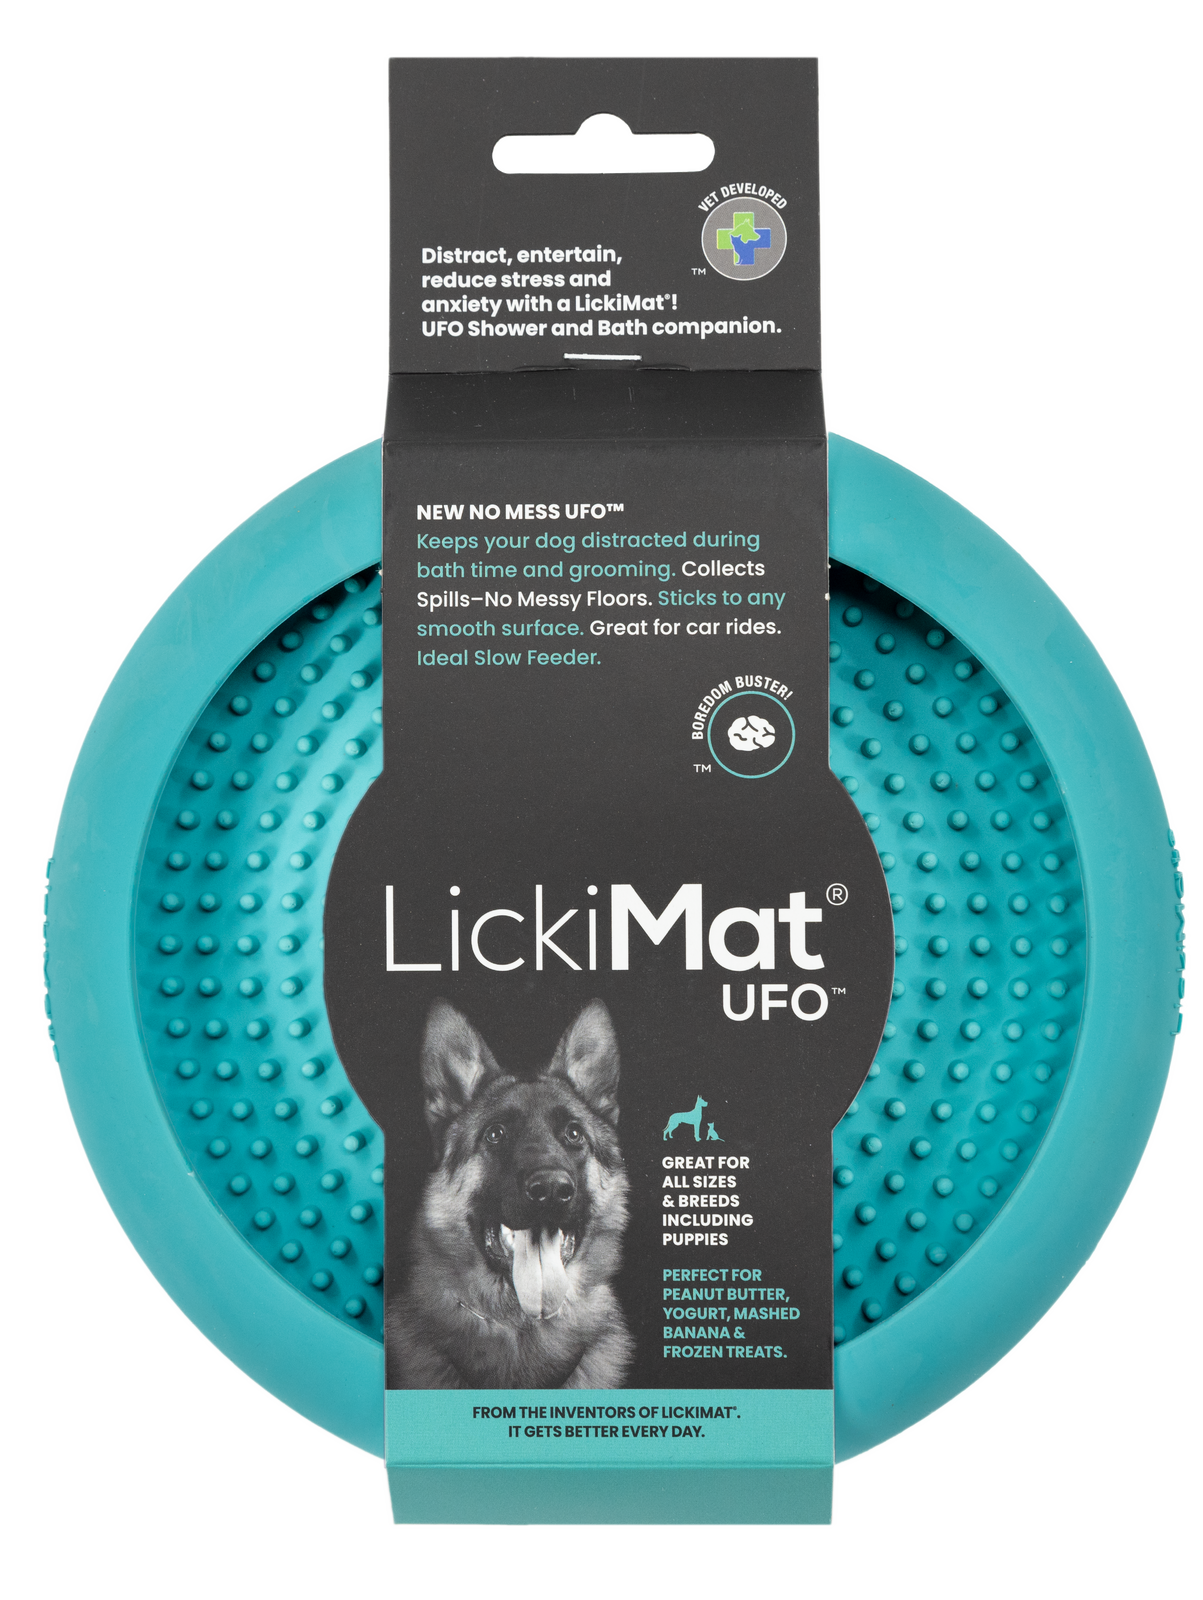 Lick Mat for Dogs Slow Feeder Licking Mat Anxiety Relief Lick Pad with  Suction Cups for Peanut Butter Food Treats Yogurt, Pets Bathing Grooming